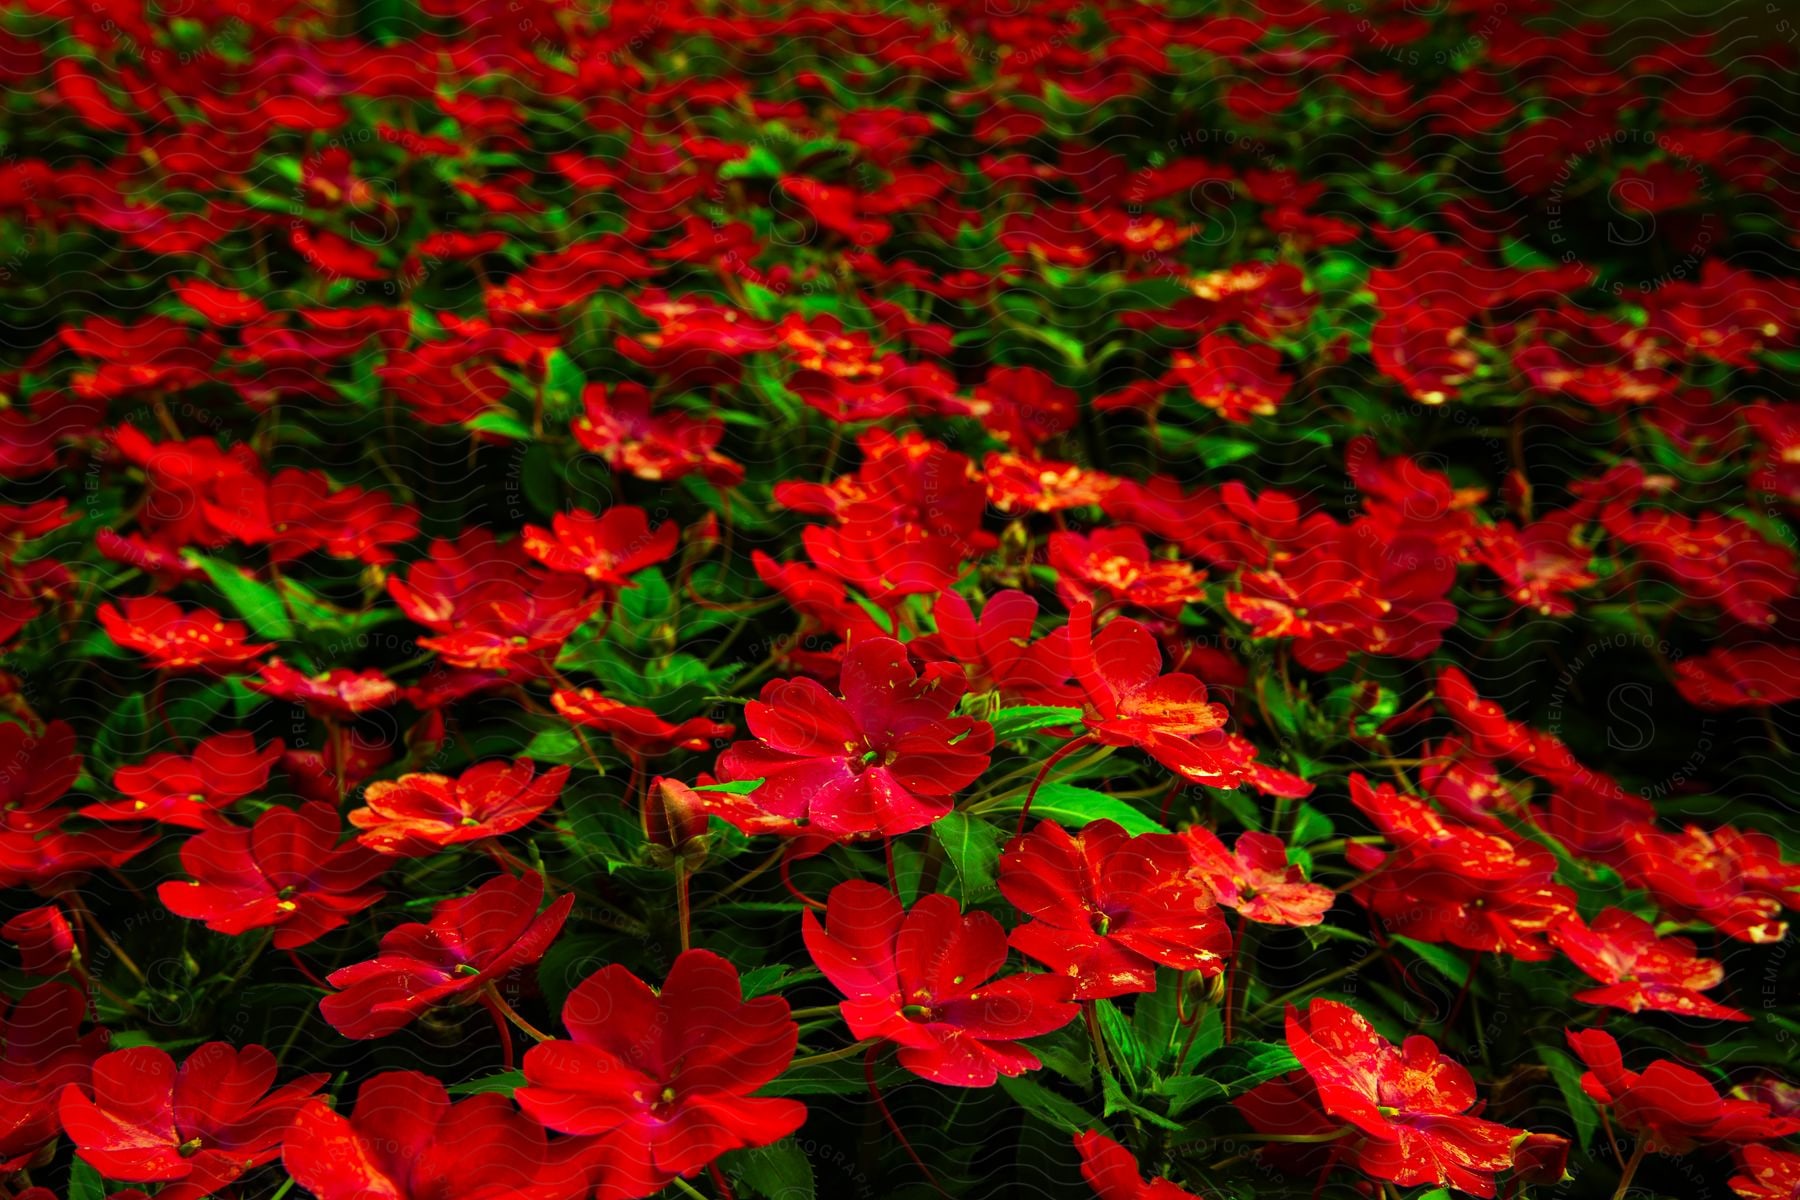 small red flowers grow close together on the ground